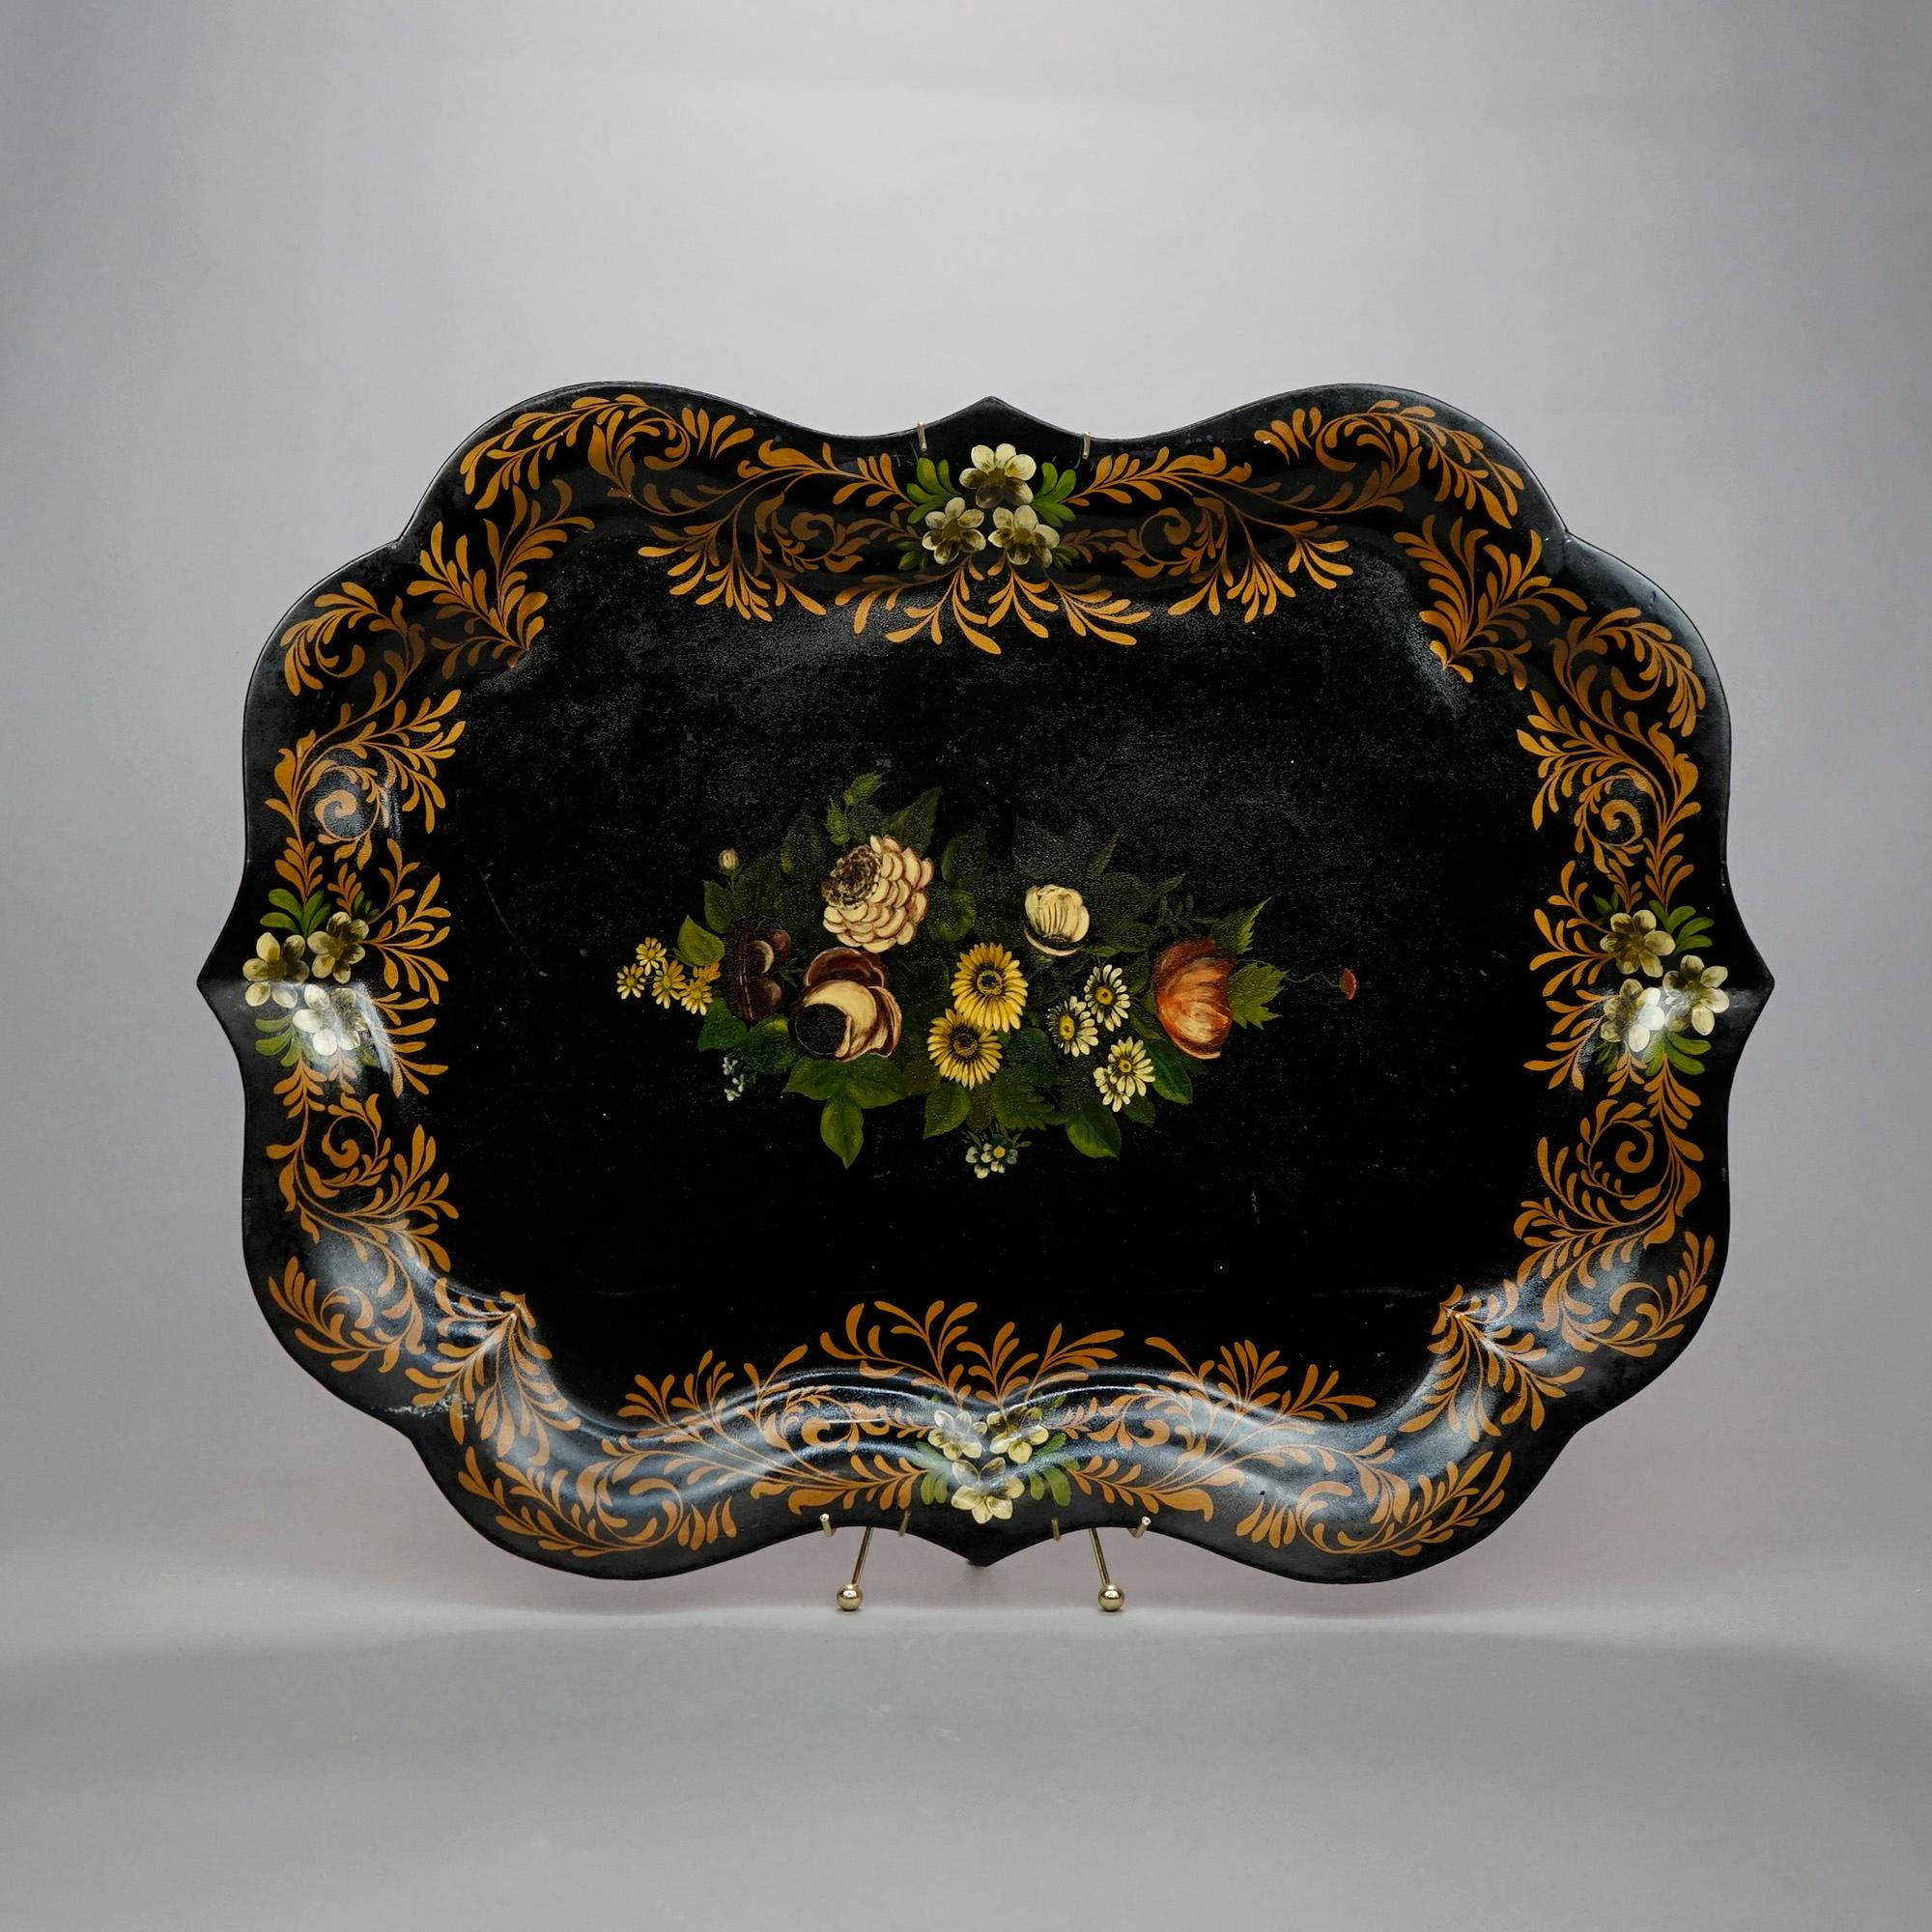 An antique and large toleware serving tray offers shaped metal construction with hand painted floral and foliate decoration, 19th century.

Measures- 1.25''H x 29.5''W x 22.5''D.

Catalogue Note: Ask about DISCOUNTED DELIVERY RATES available to most